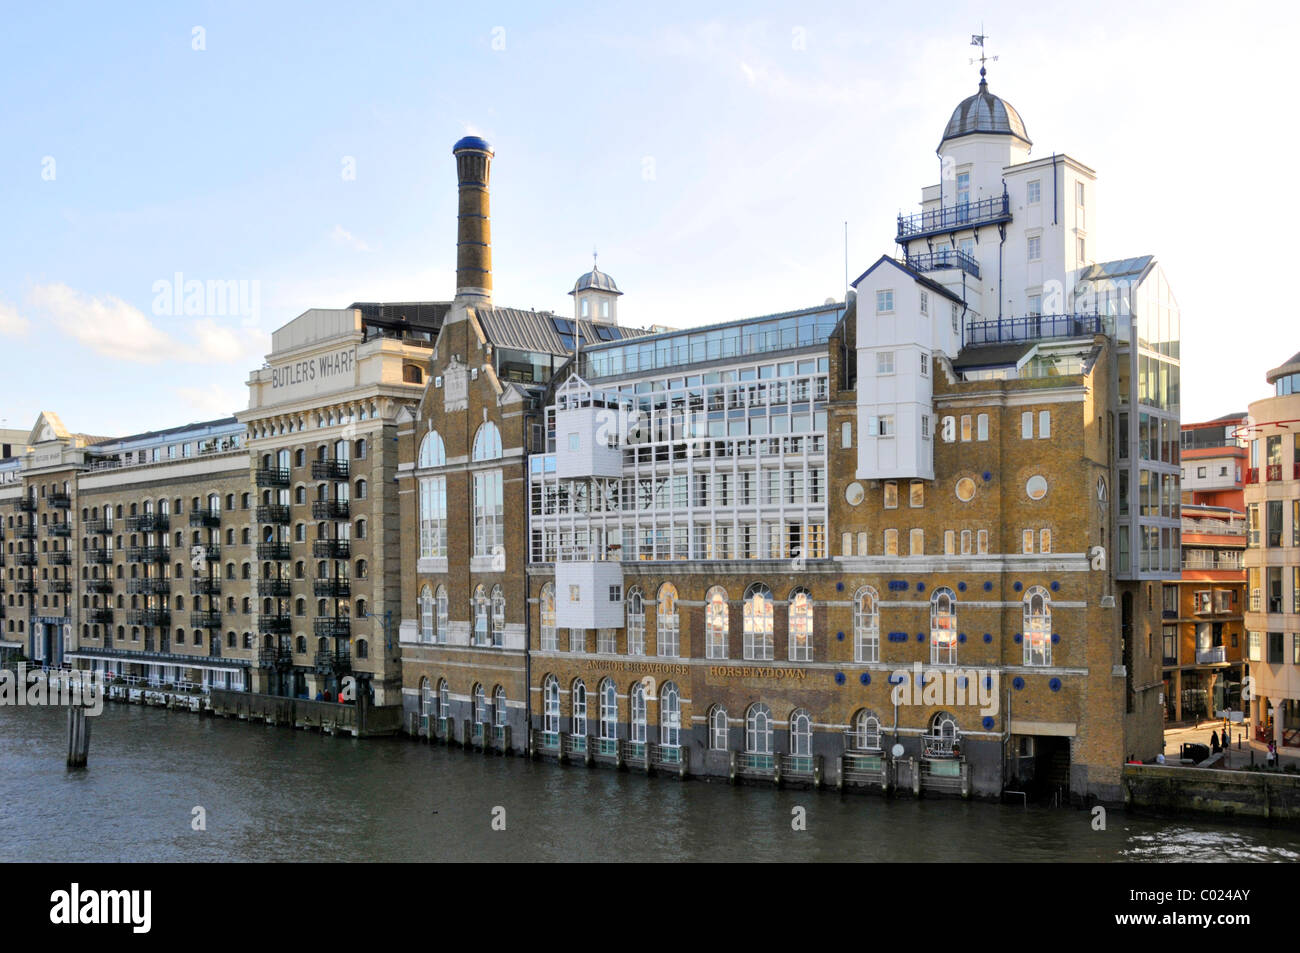 Butlers Wharf an English historic building converted into apartments from dockside warehouses beside River Thames Shad Thames Southwark London England Stock Photo